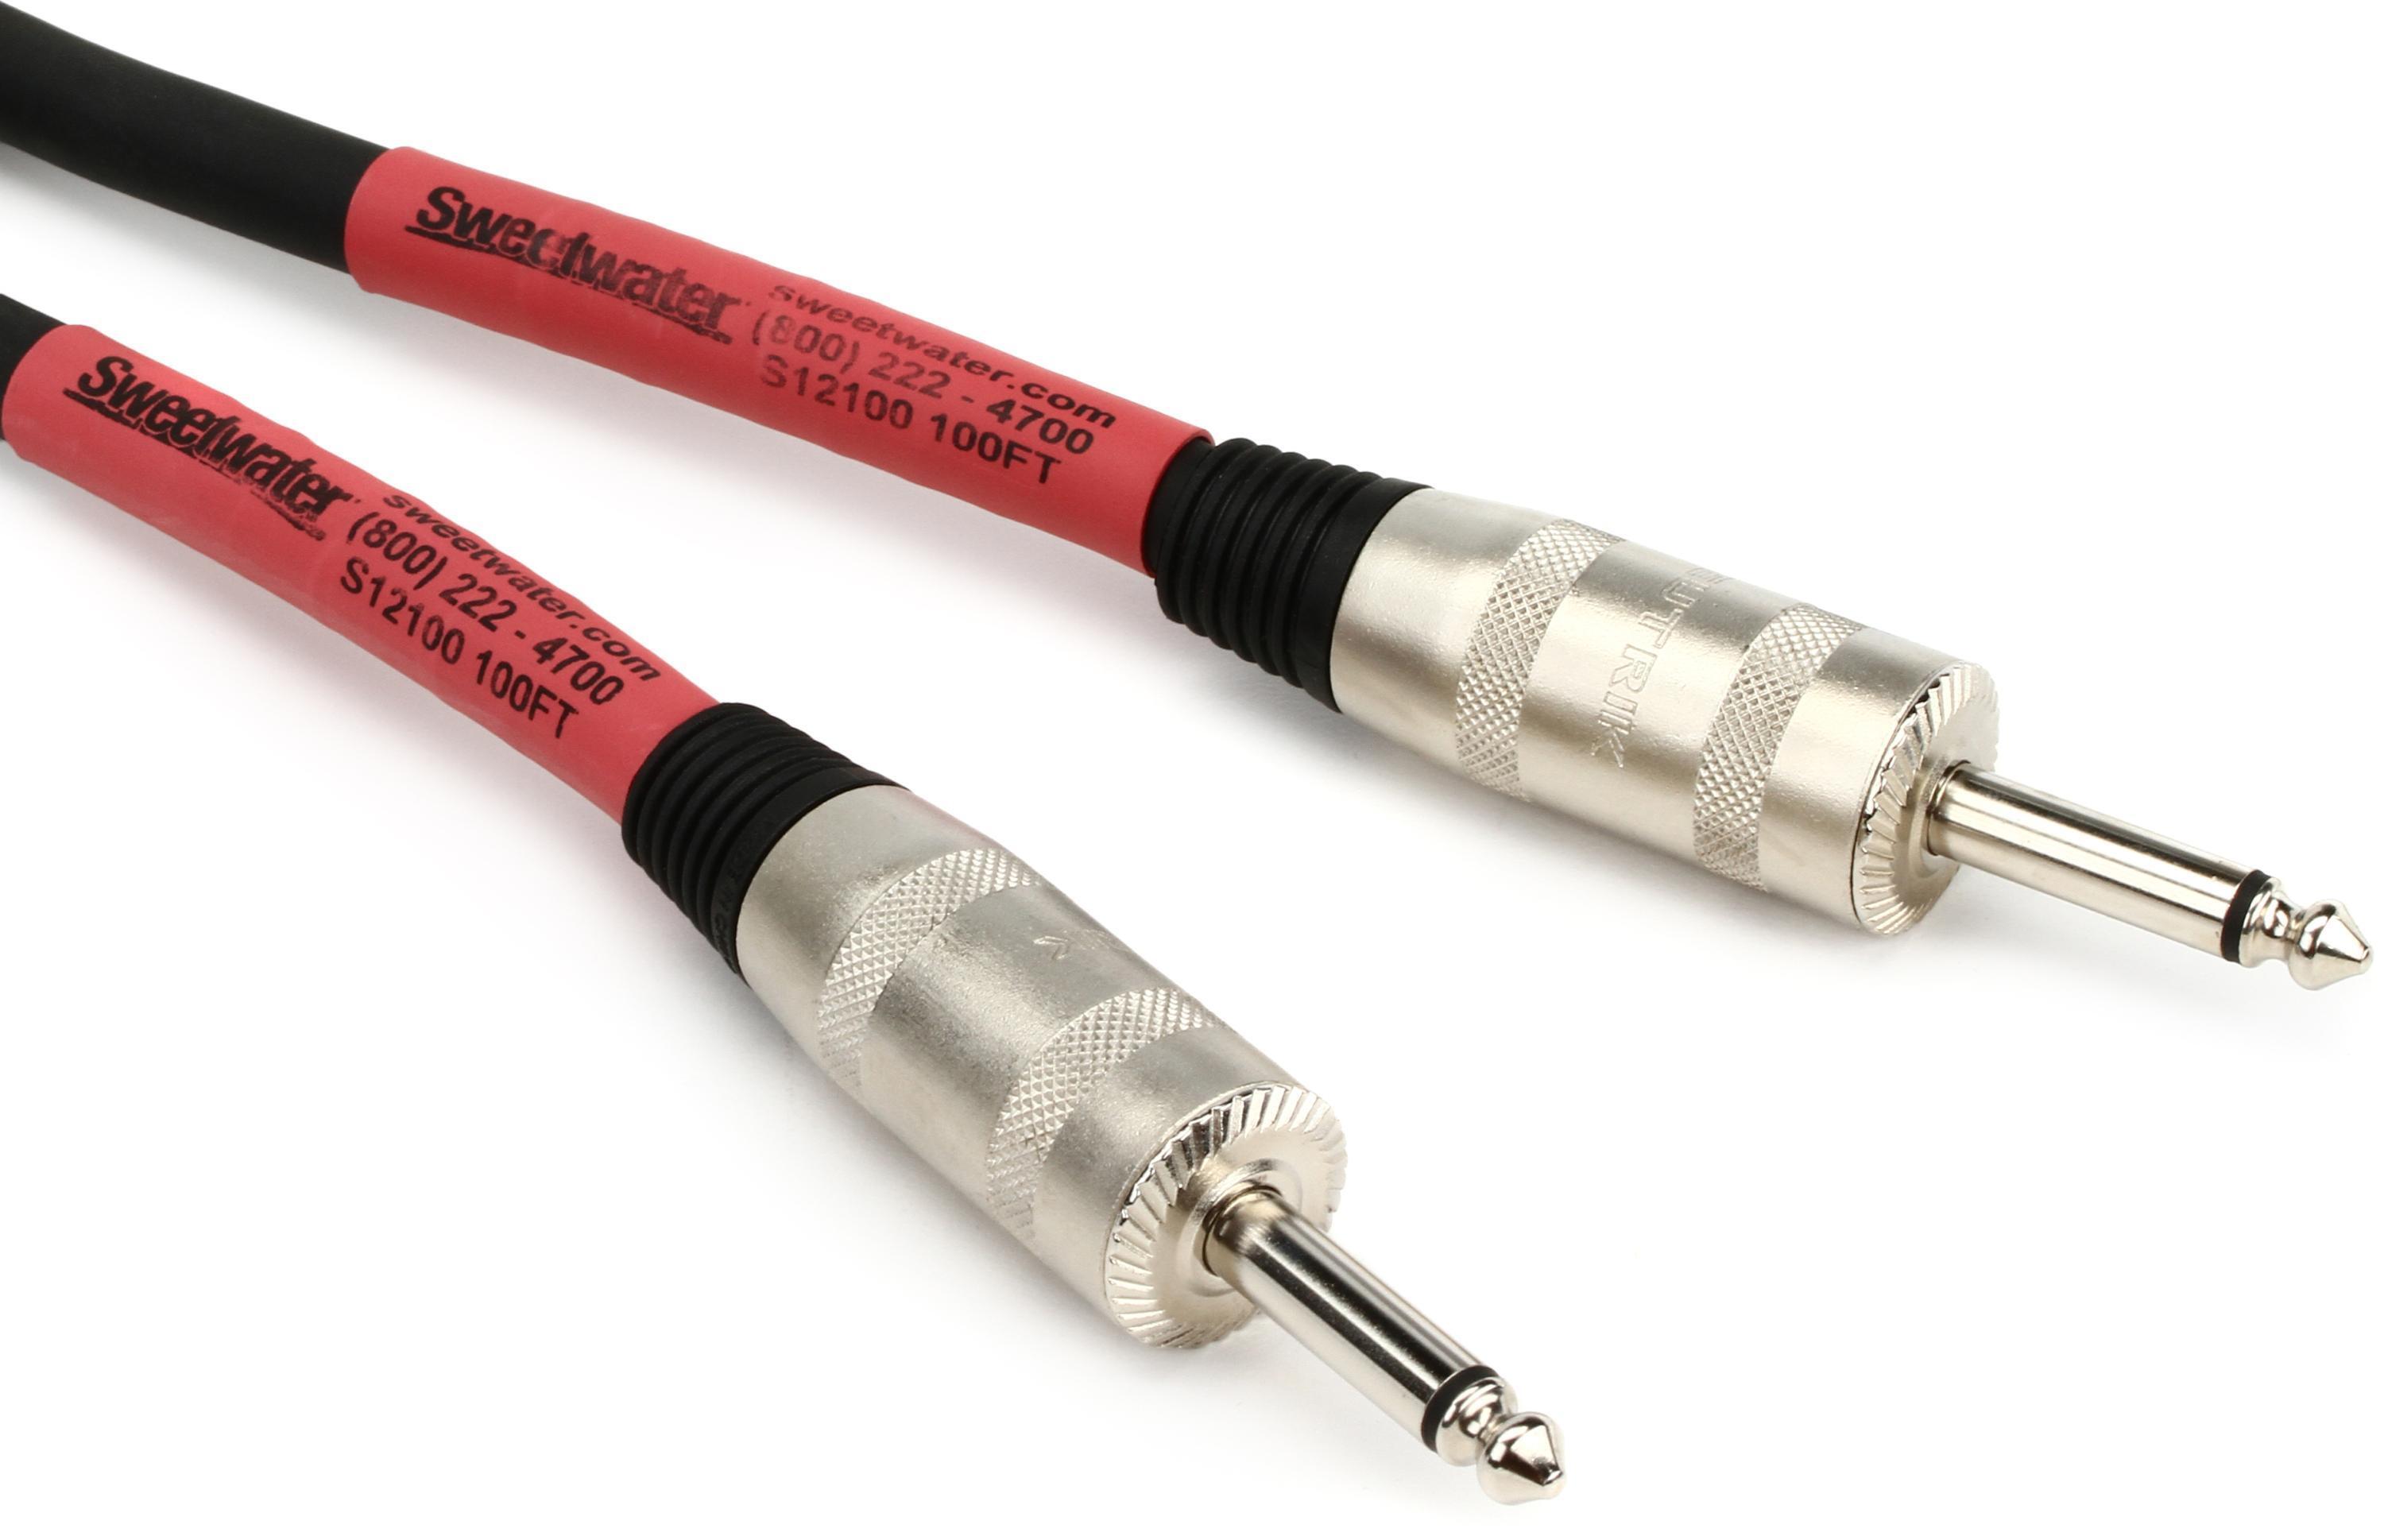 Bundled Item: Pro Co S12 Speaker Cable - 1/4 inch TS Jumbo to 1/4 inch Jumbo - 100 foot